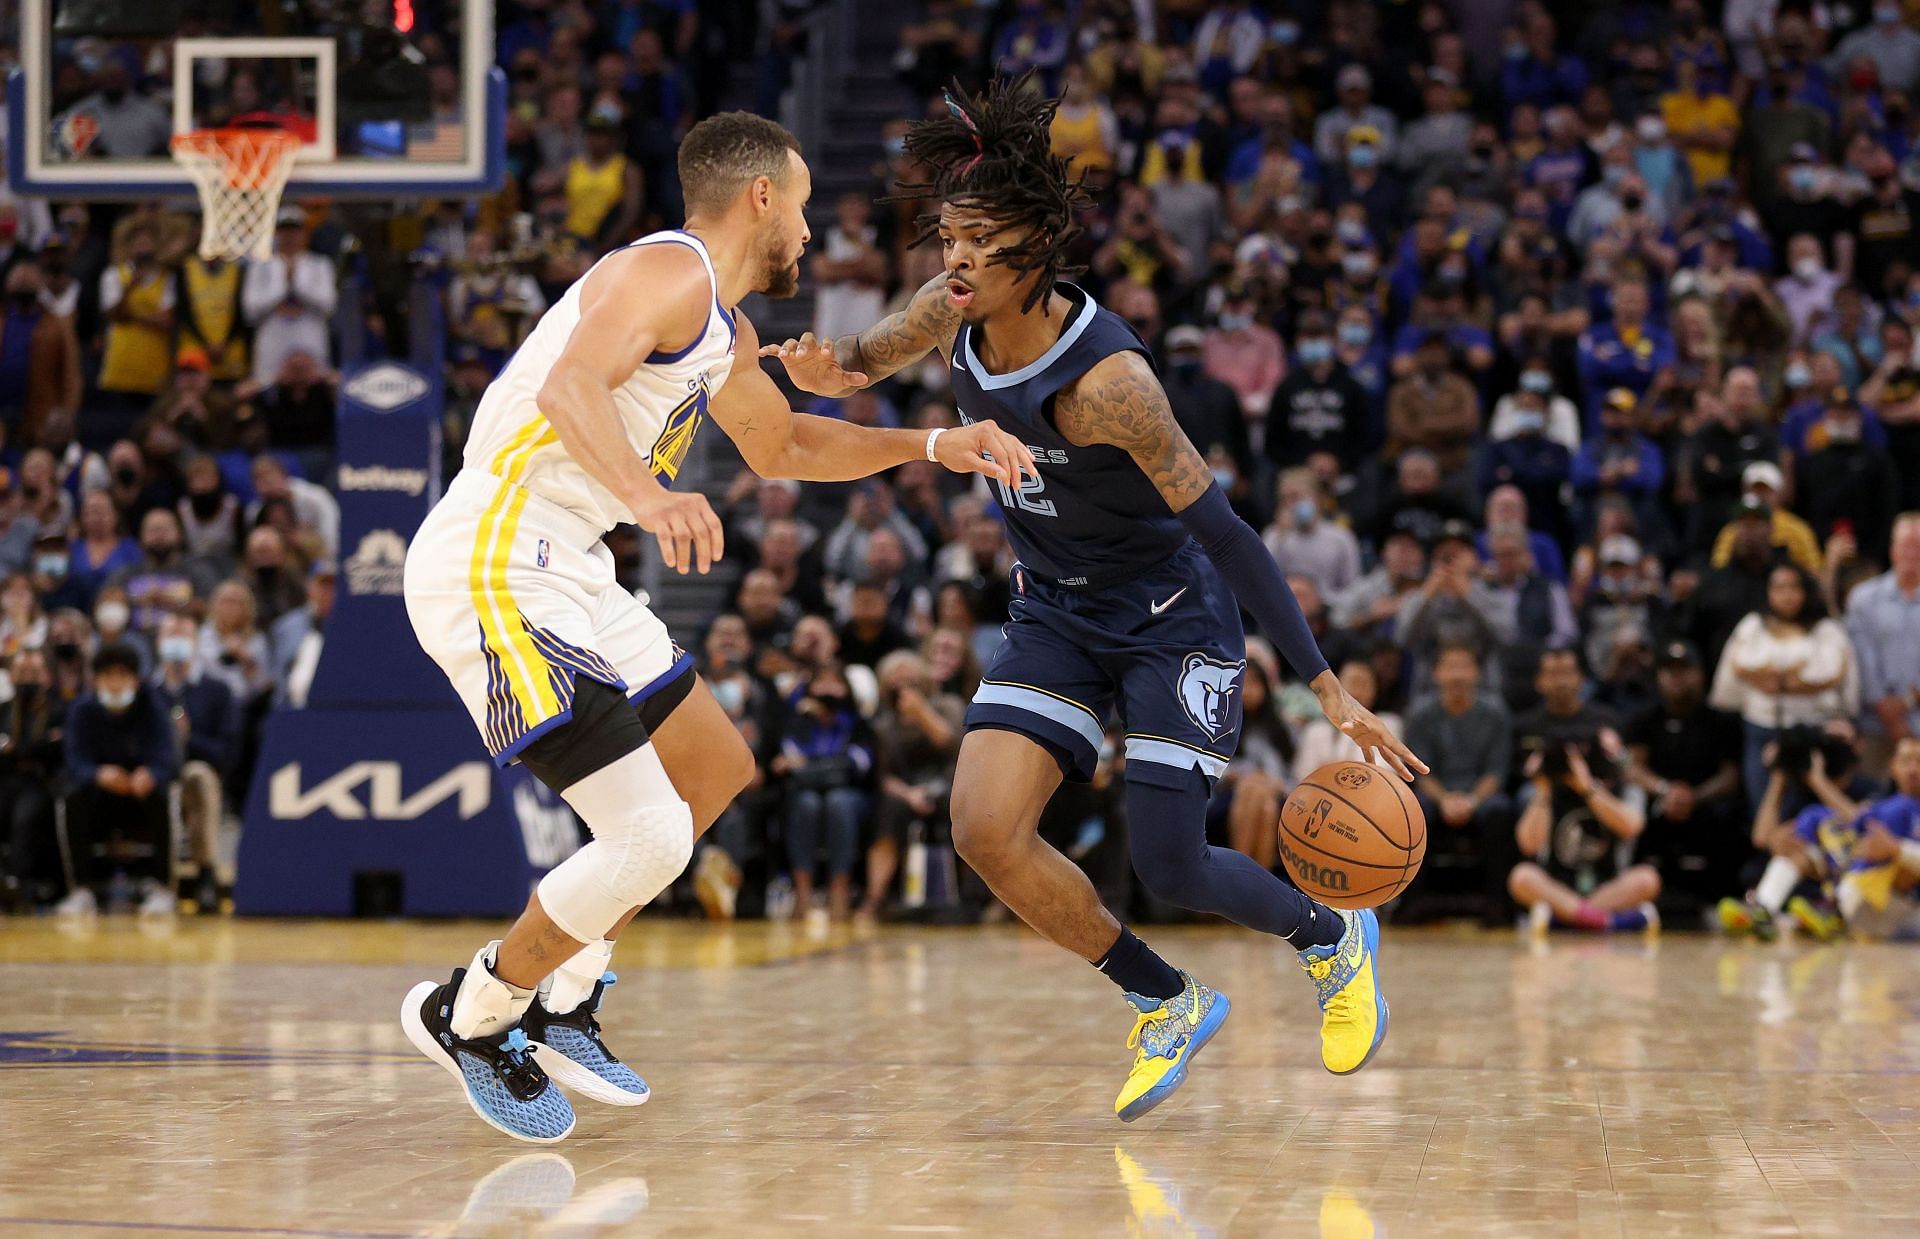 Ja Morant #12 of the Memphis Grizzlies is guarded by Stephen Curry #30 of the Golden State Warriors at Chase Center on October 28, 2021 in San Francisco, California.